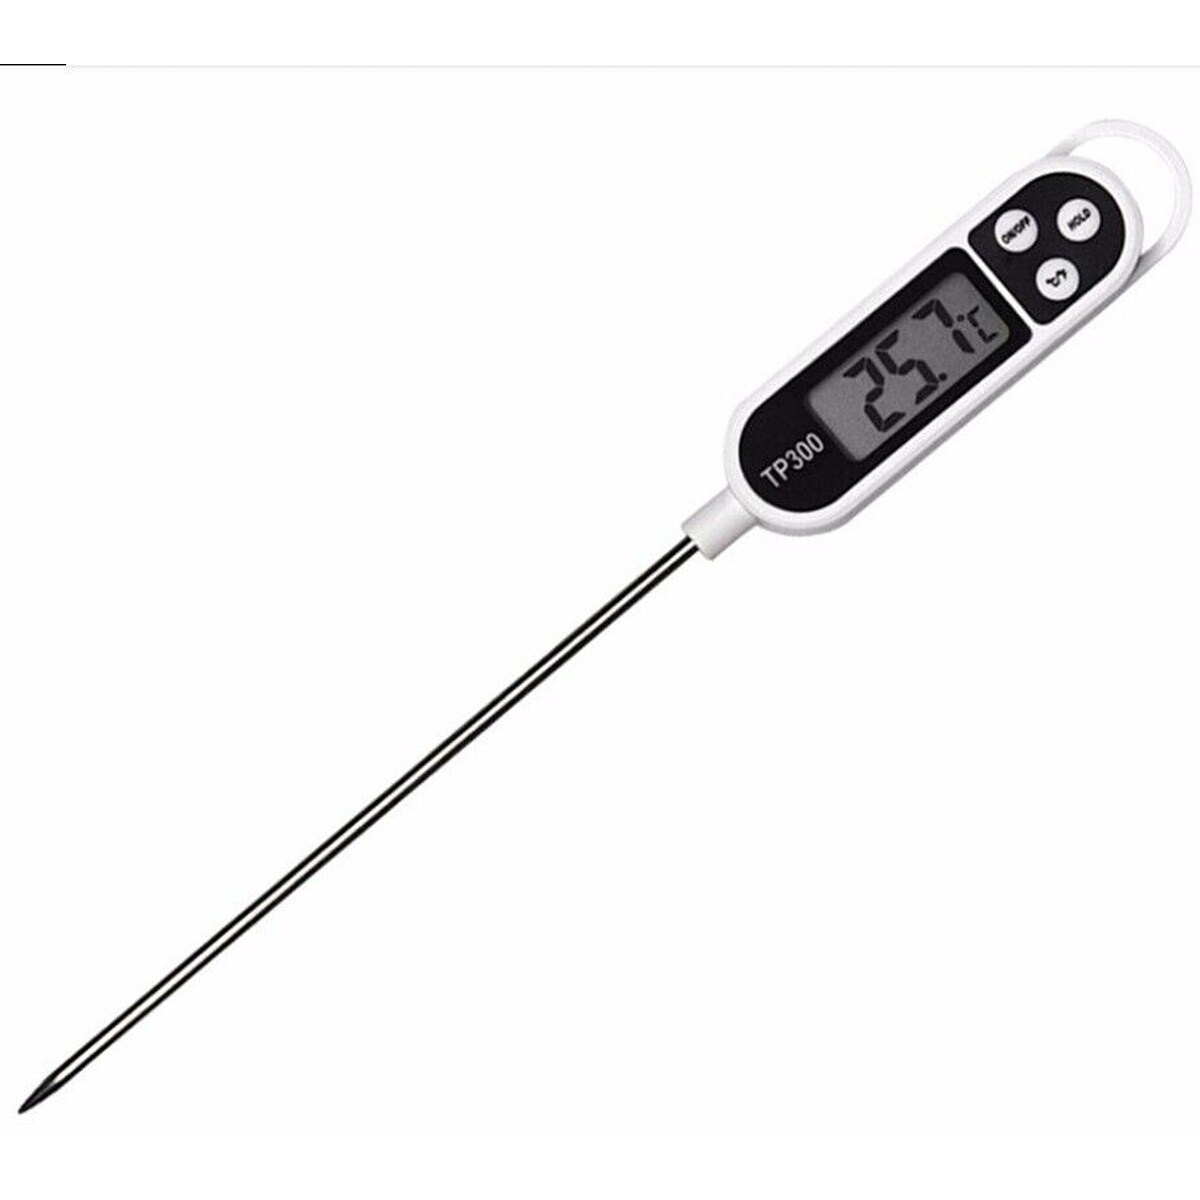 Stainless Steel Digital Cooking Thermometer